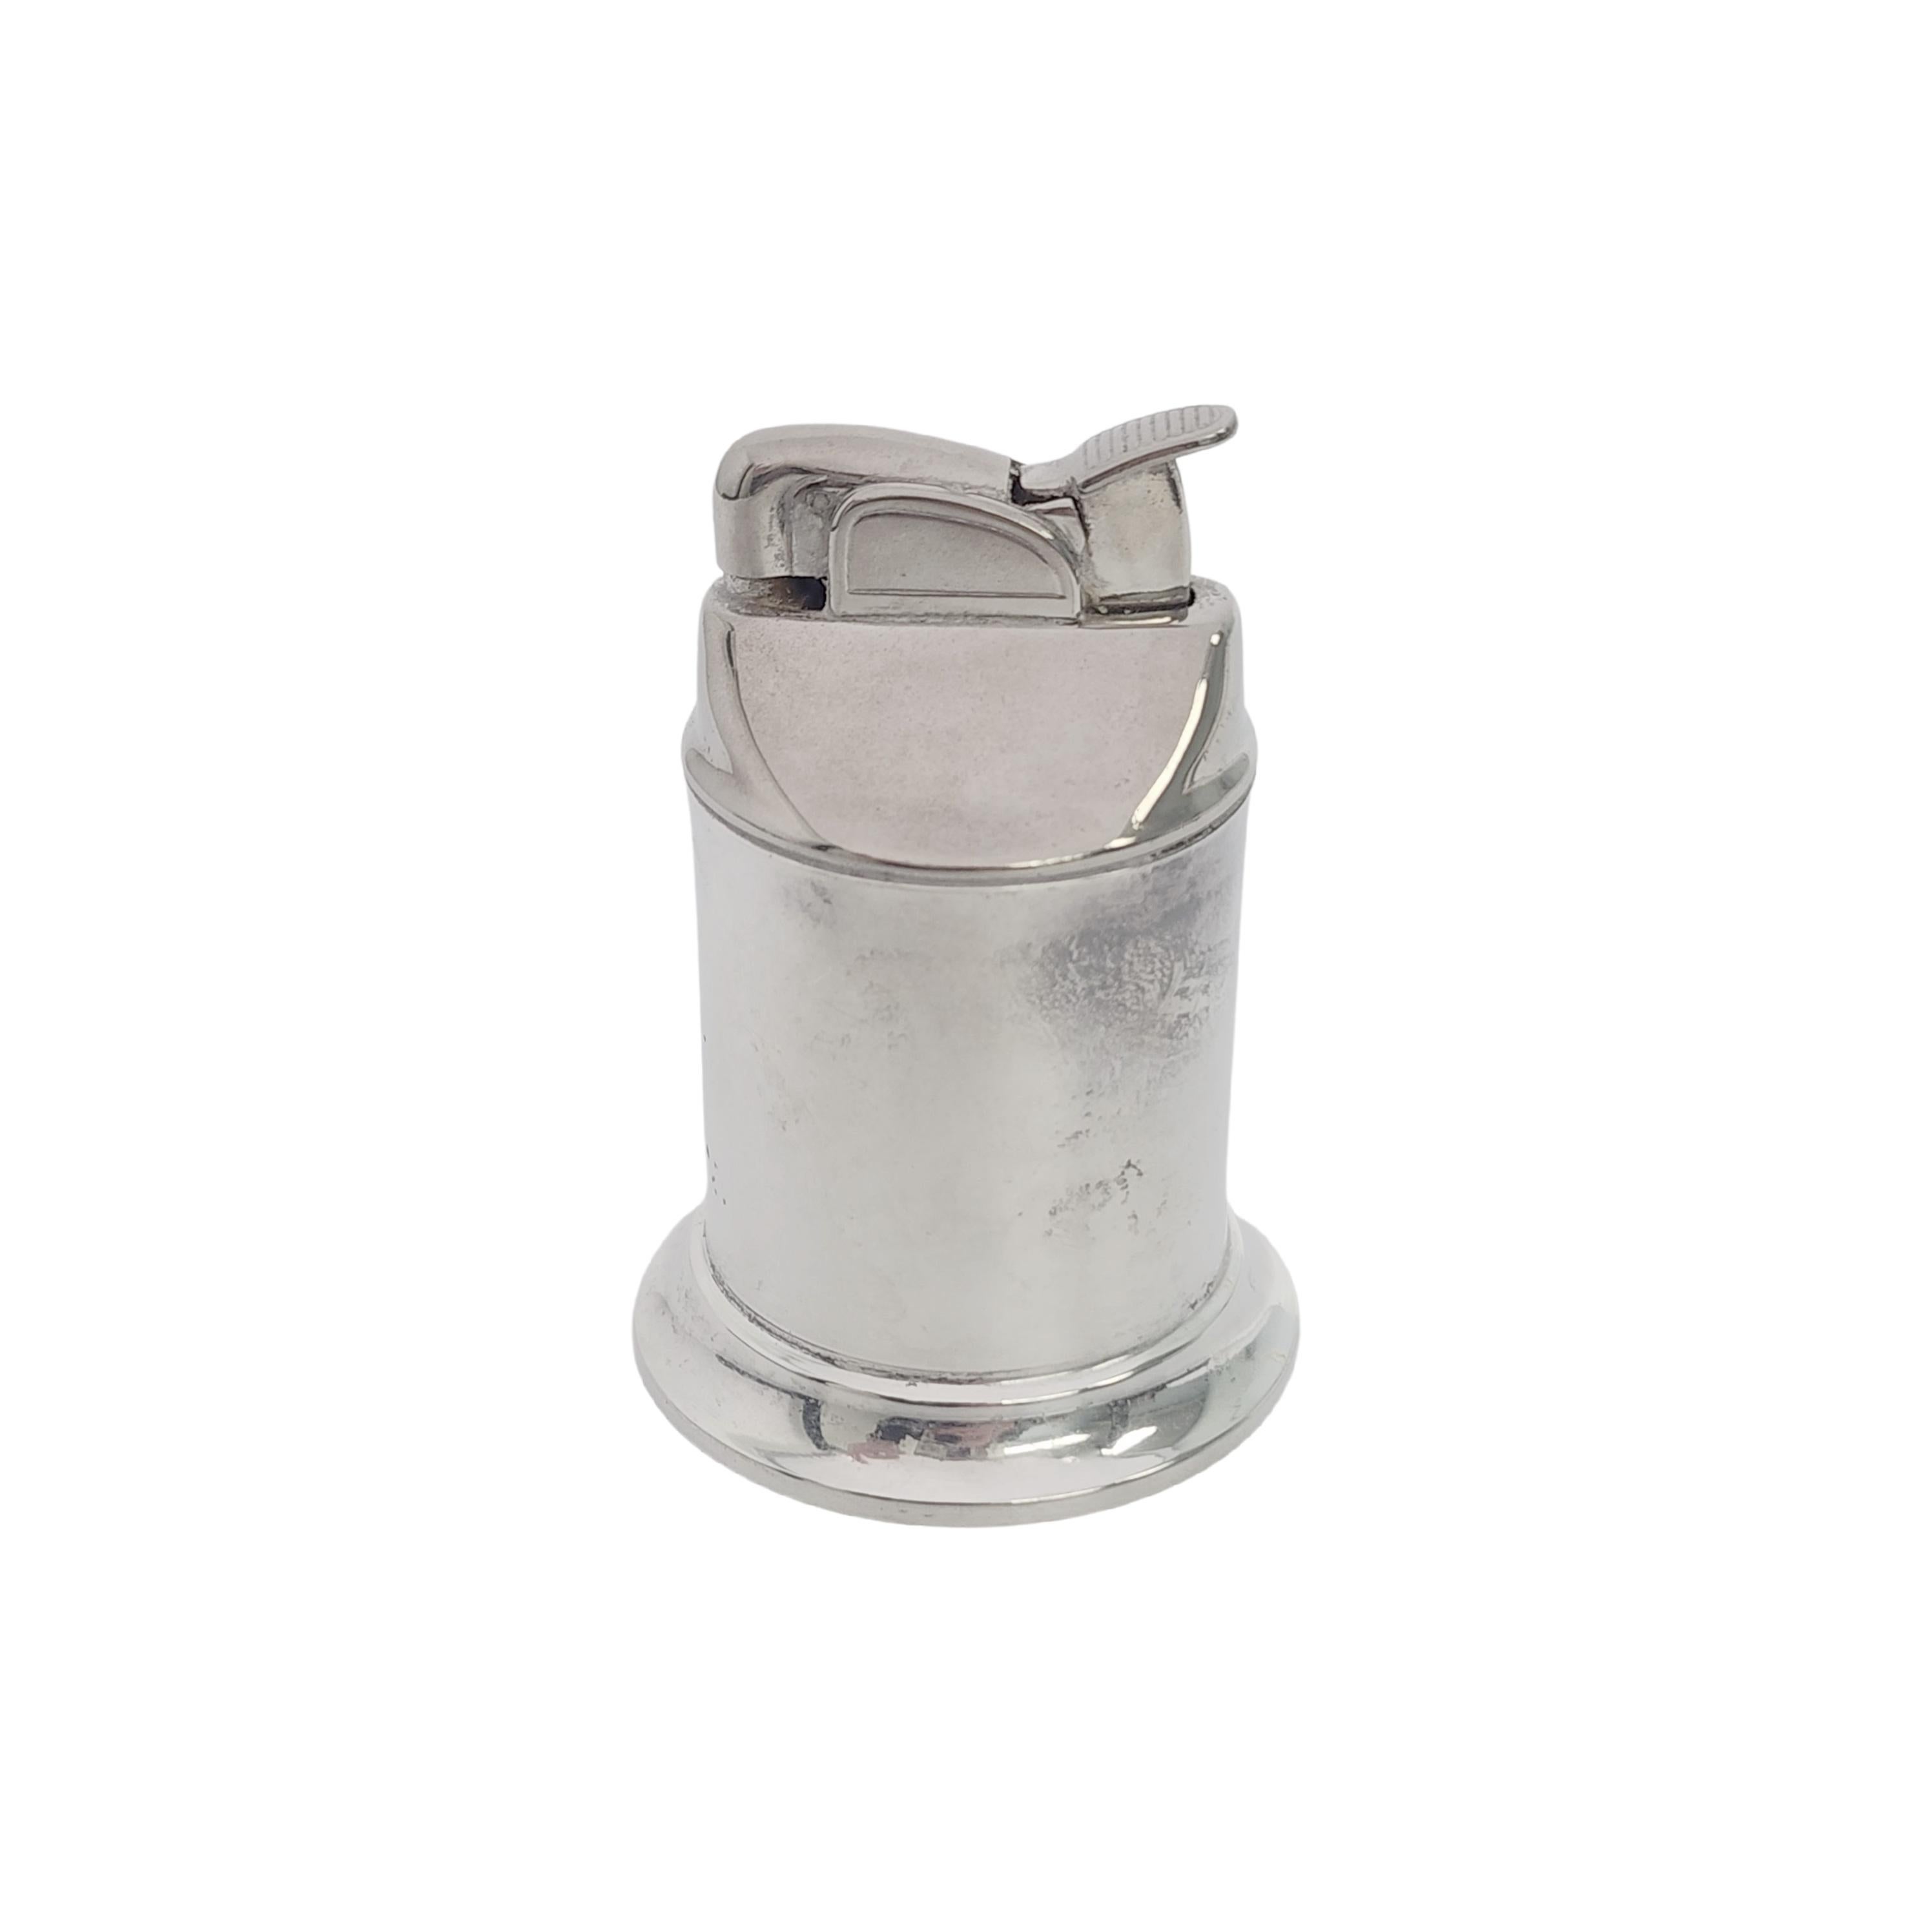 Sterling silver table lighter by Tiffany & Co, circa 1956.

No monogram

Simple and classic smooth polished finish on a cylindrical Art Deco design. Inner petrol wick lighter by Evans. Tiffany box and pouch are not included.

Measures approx 3 1/4